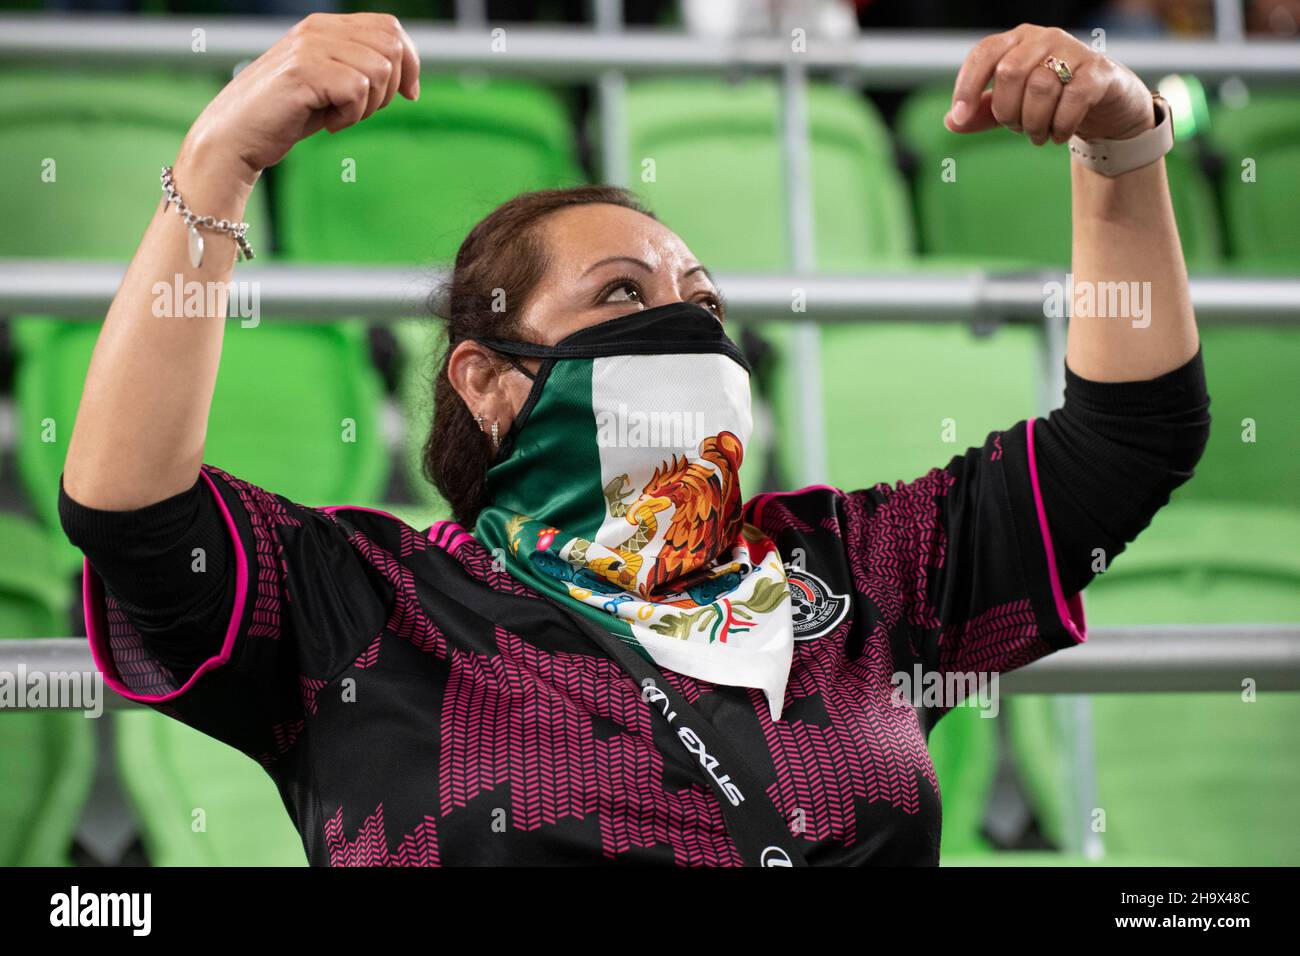 Austin, Texas, USA. 8th December, 2021. Mexico fan cheers for her national team during the first half of a Mexico vs. Chile friendly at Austin's Q2 Stadium. The teams battled to a 2-2- tie at the end of regulation time. Credit: Bob Daemmrich/Alamy Live News Stock Photo